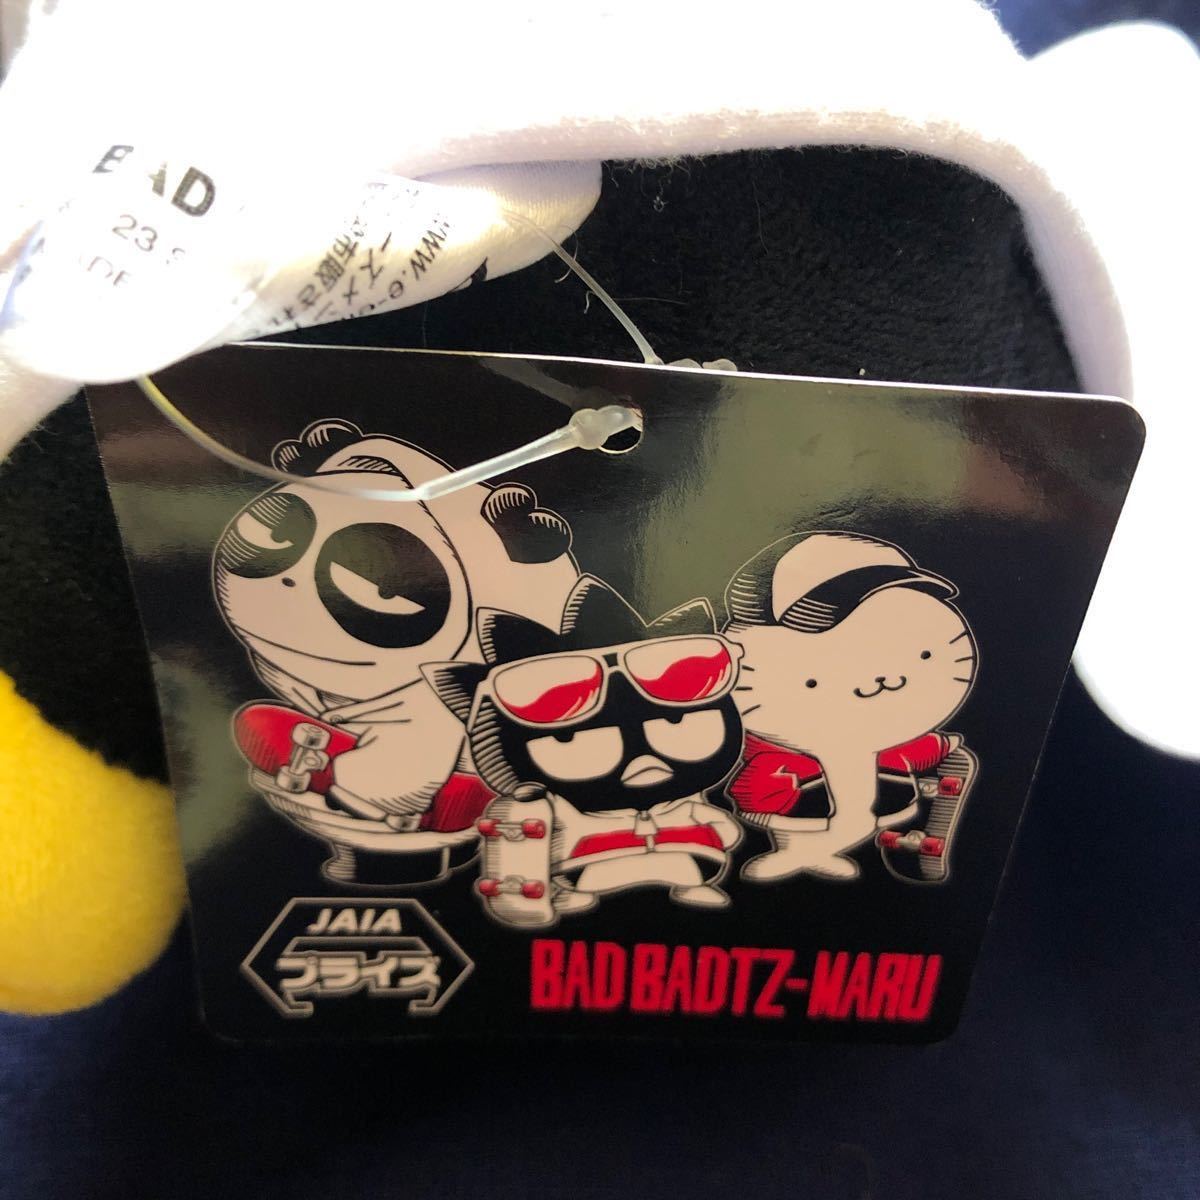  rare not for sale Sanrio 2023 year made Bad Badtz Maru powerful skateboard life doll soft toy hard-to-find amusement gift 